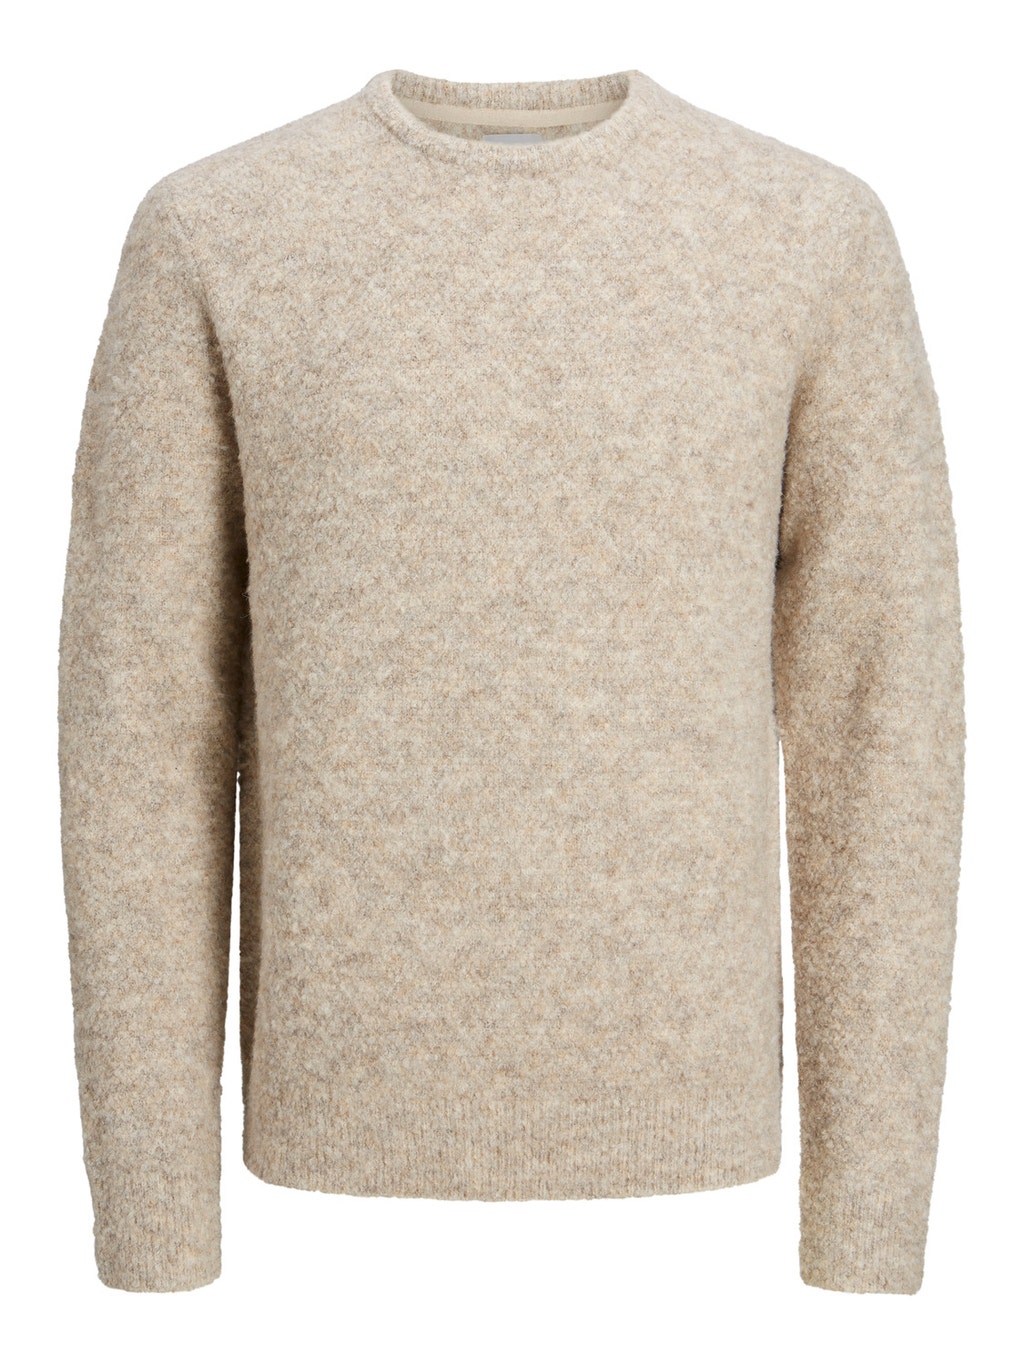 oorsprong limiet helder Polyester Knitted Pullover with 50% discount! | Jack & Jones®